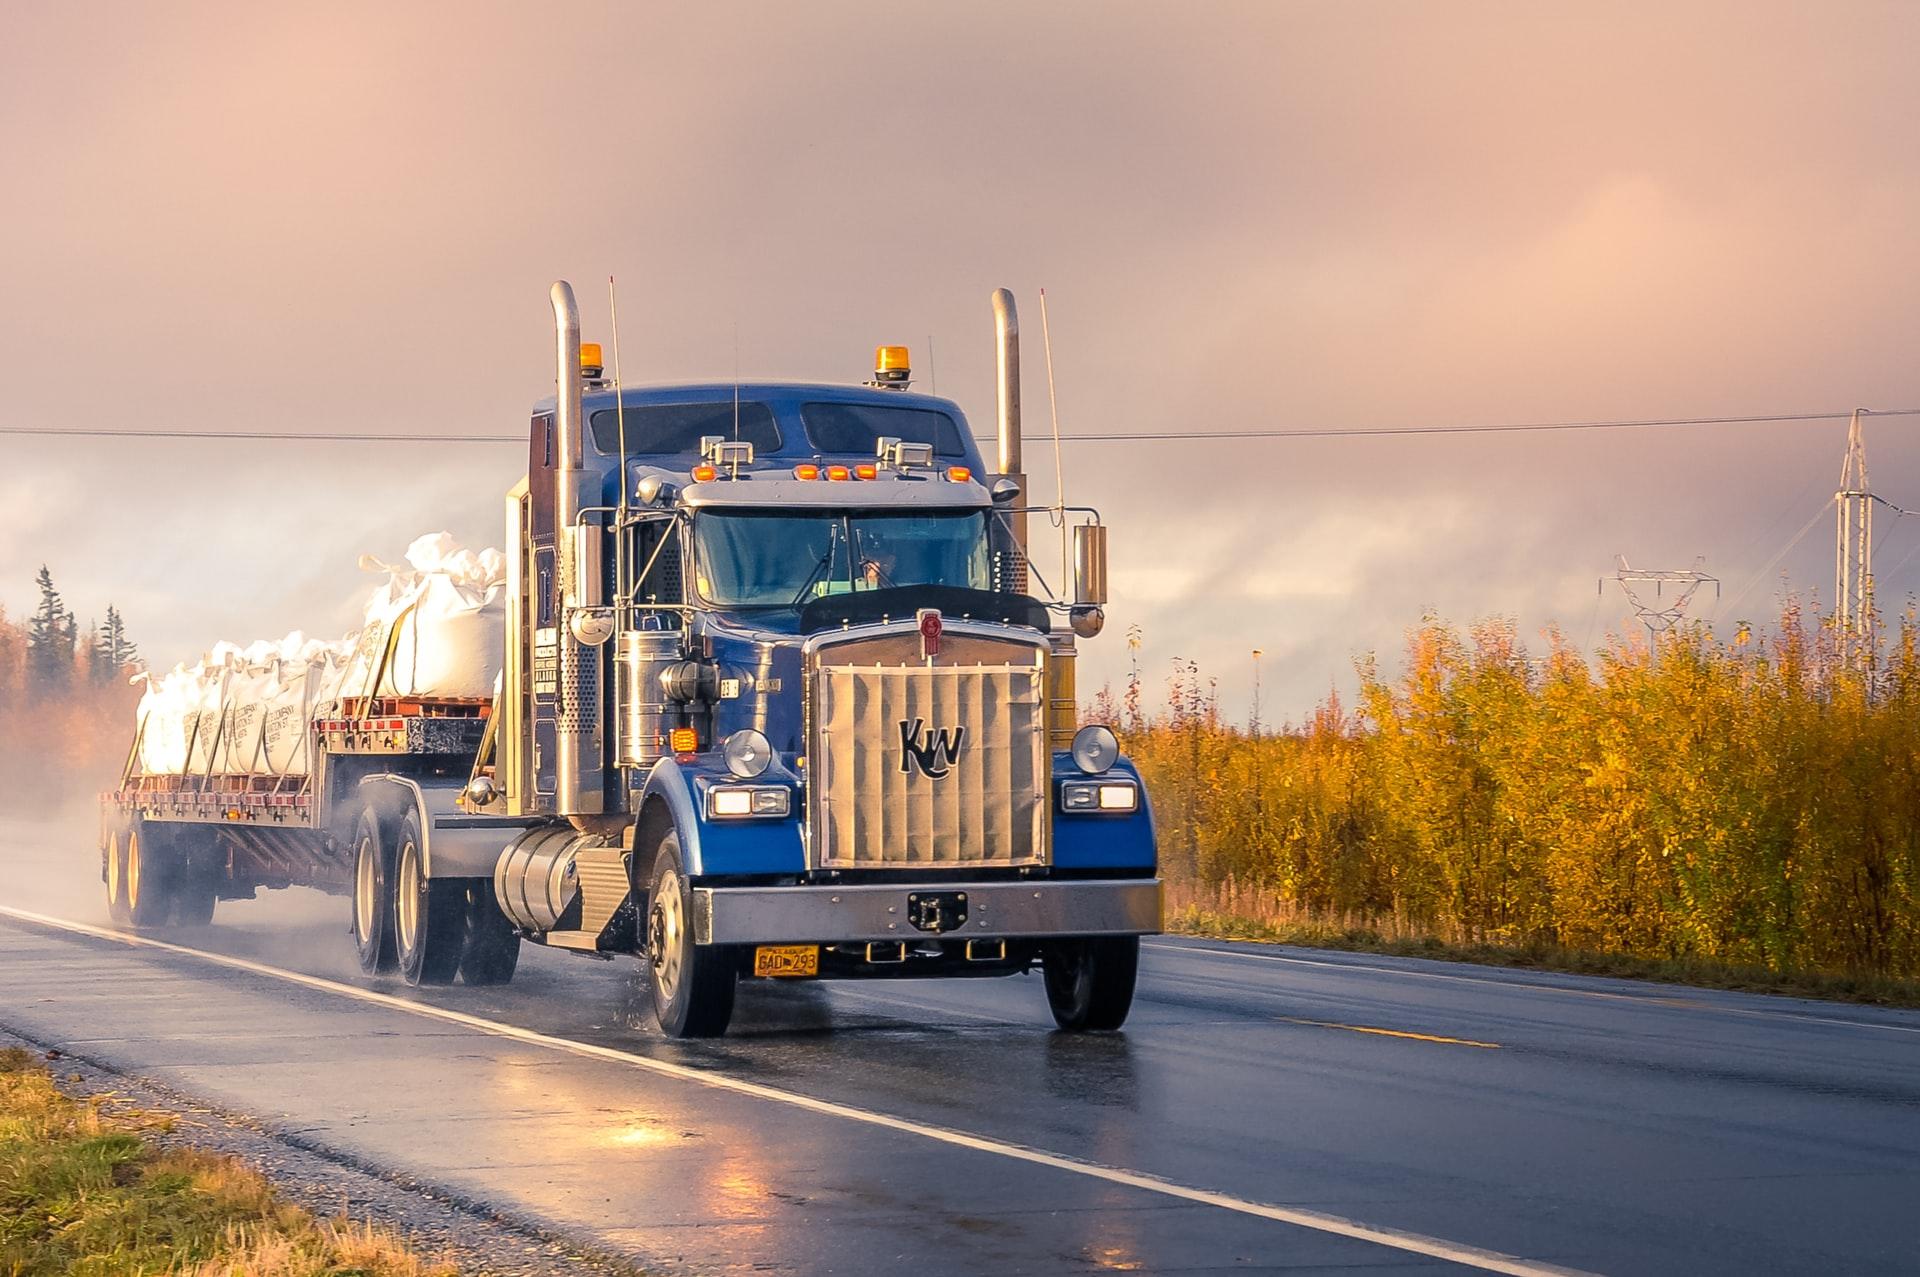 Trucking groups are seeing driver shortages.